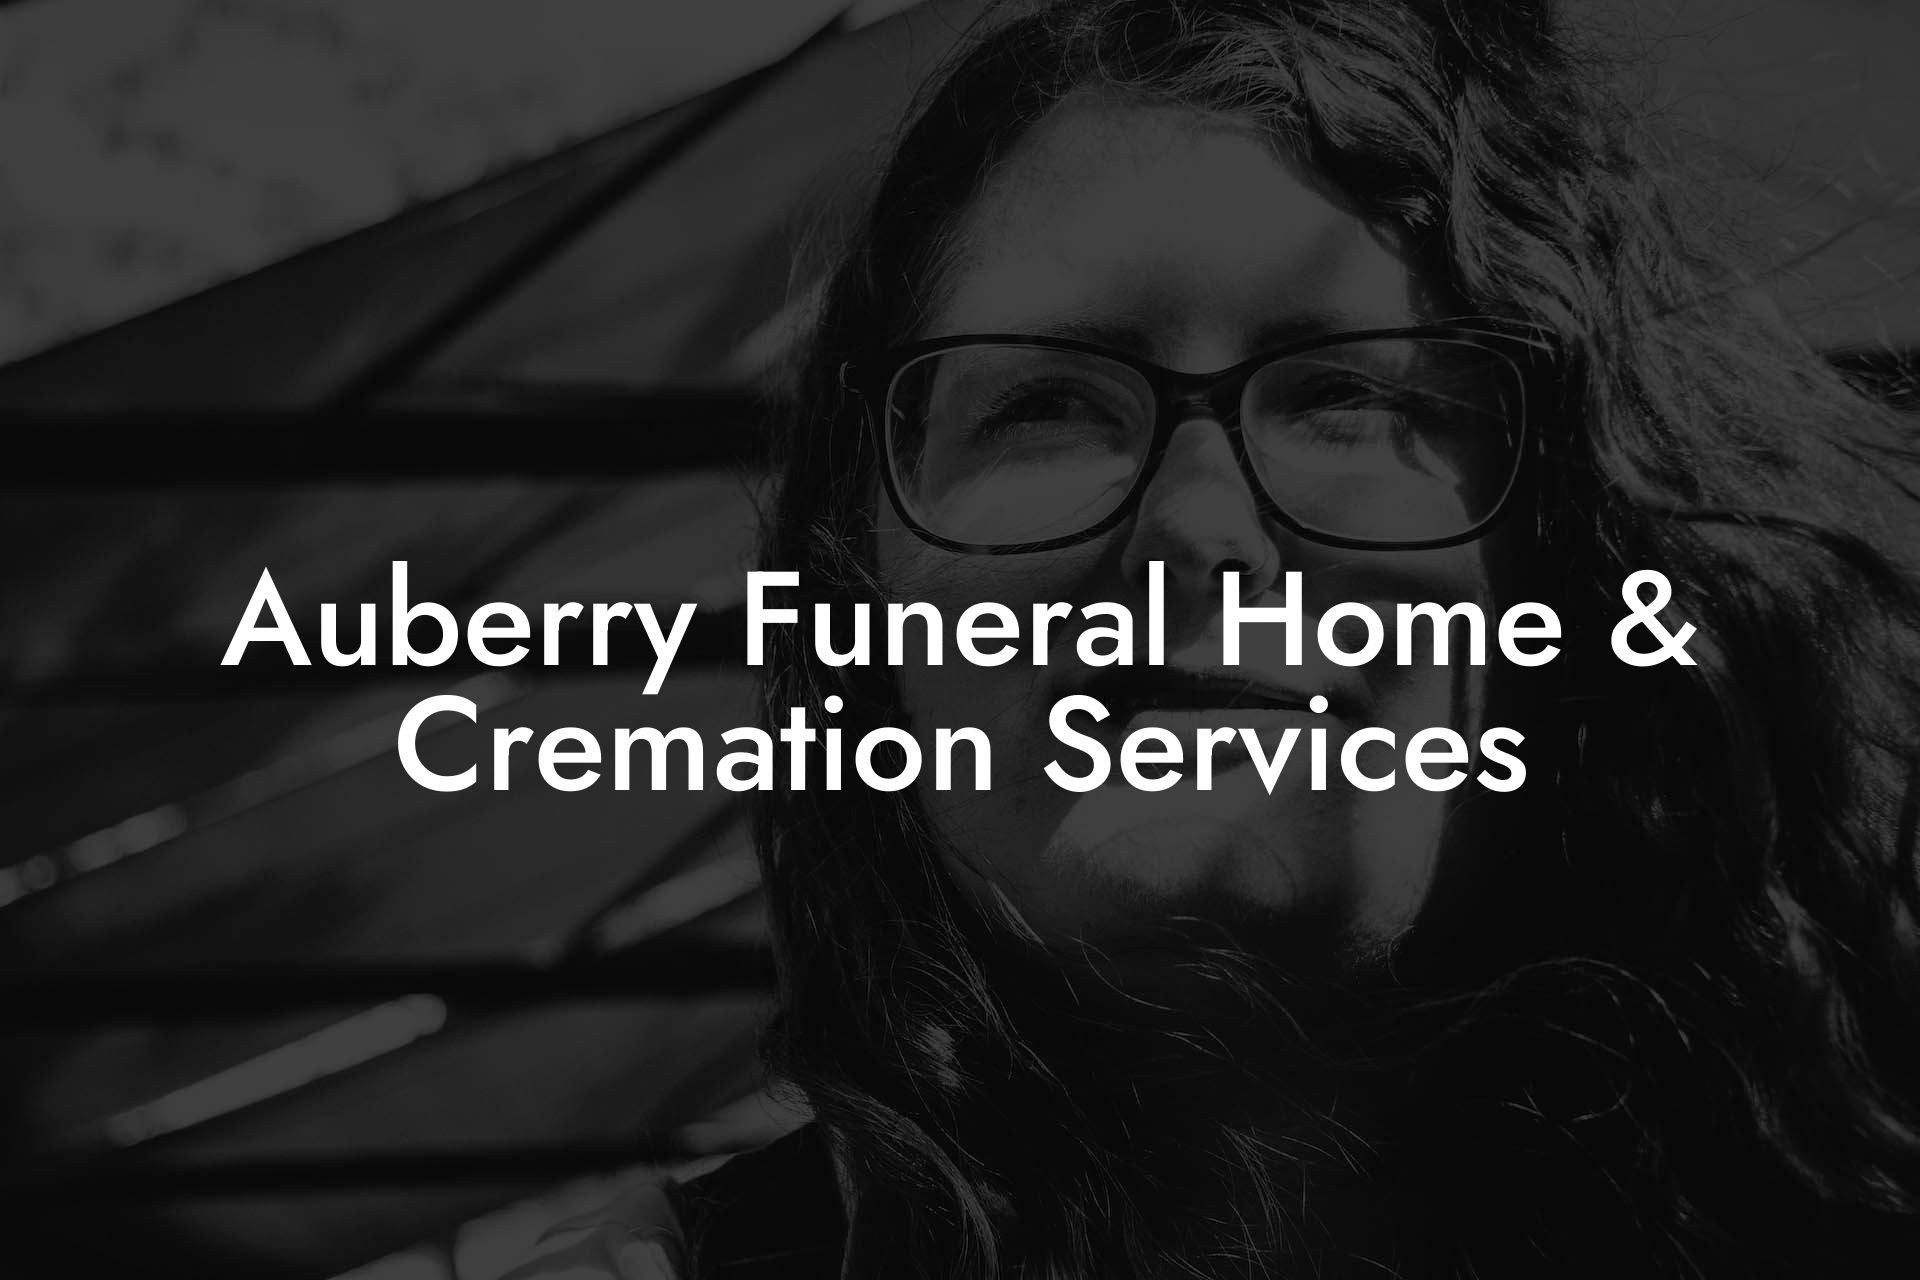 Auberry Funeral Home & Cremation Services - Eulogy Assistant